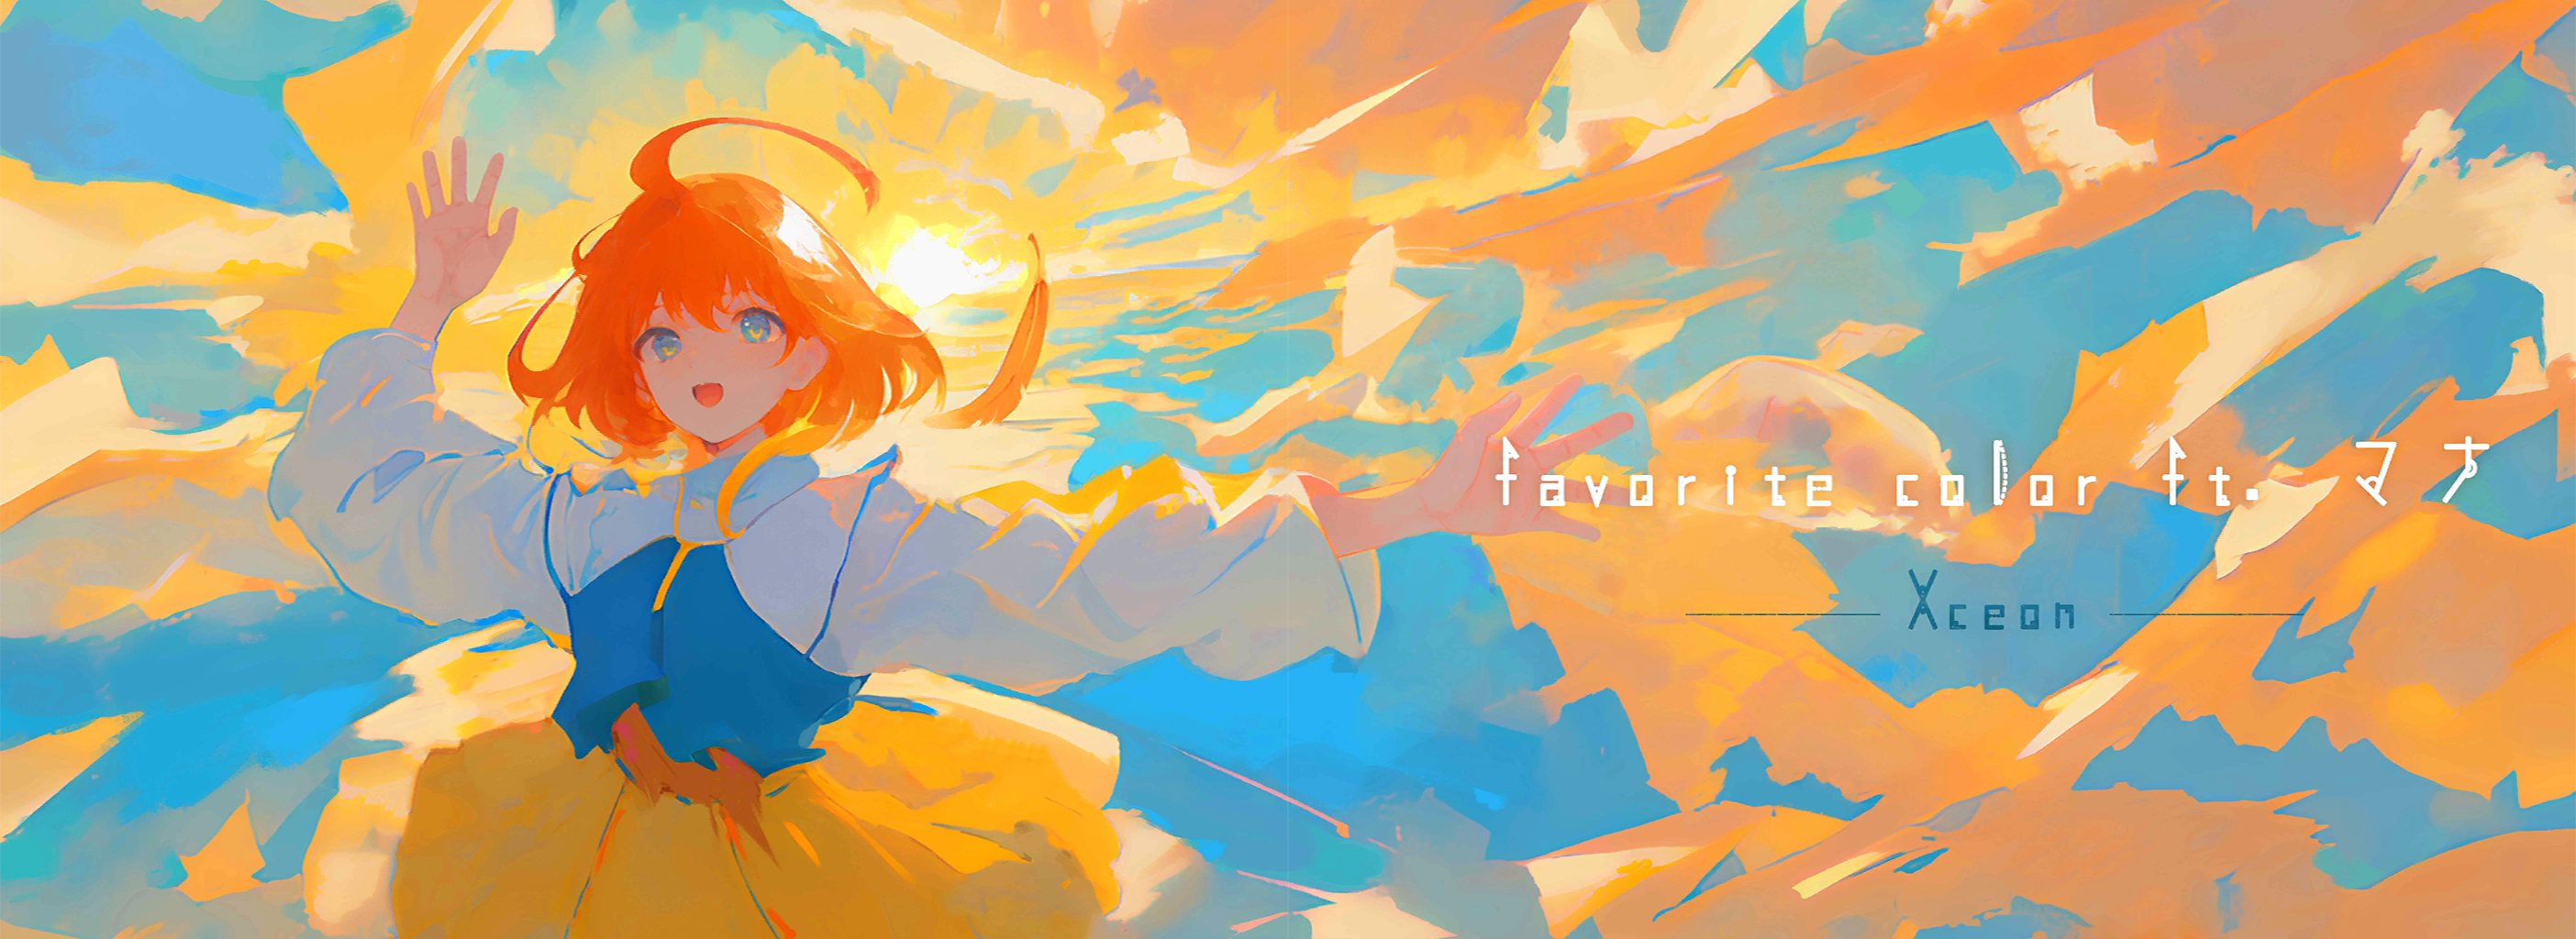 Favorite color ft. マナ.png